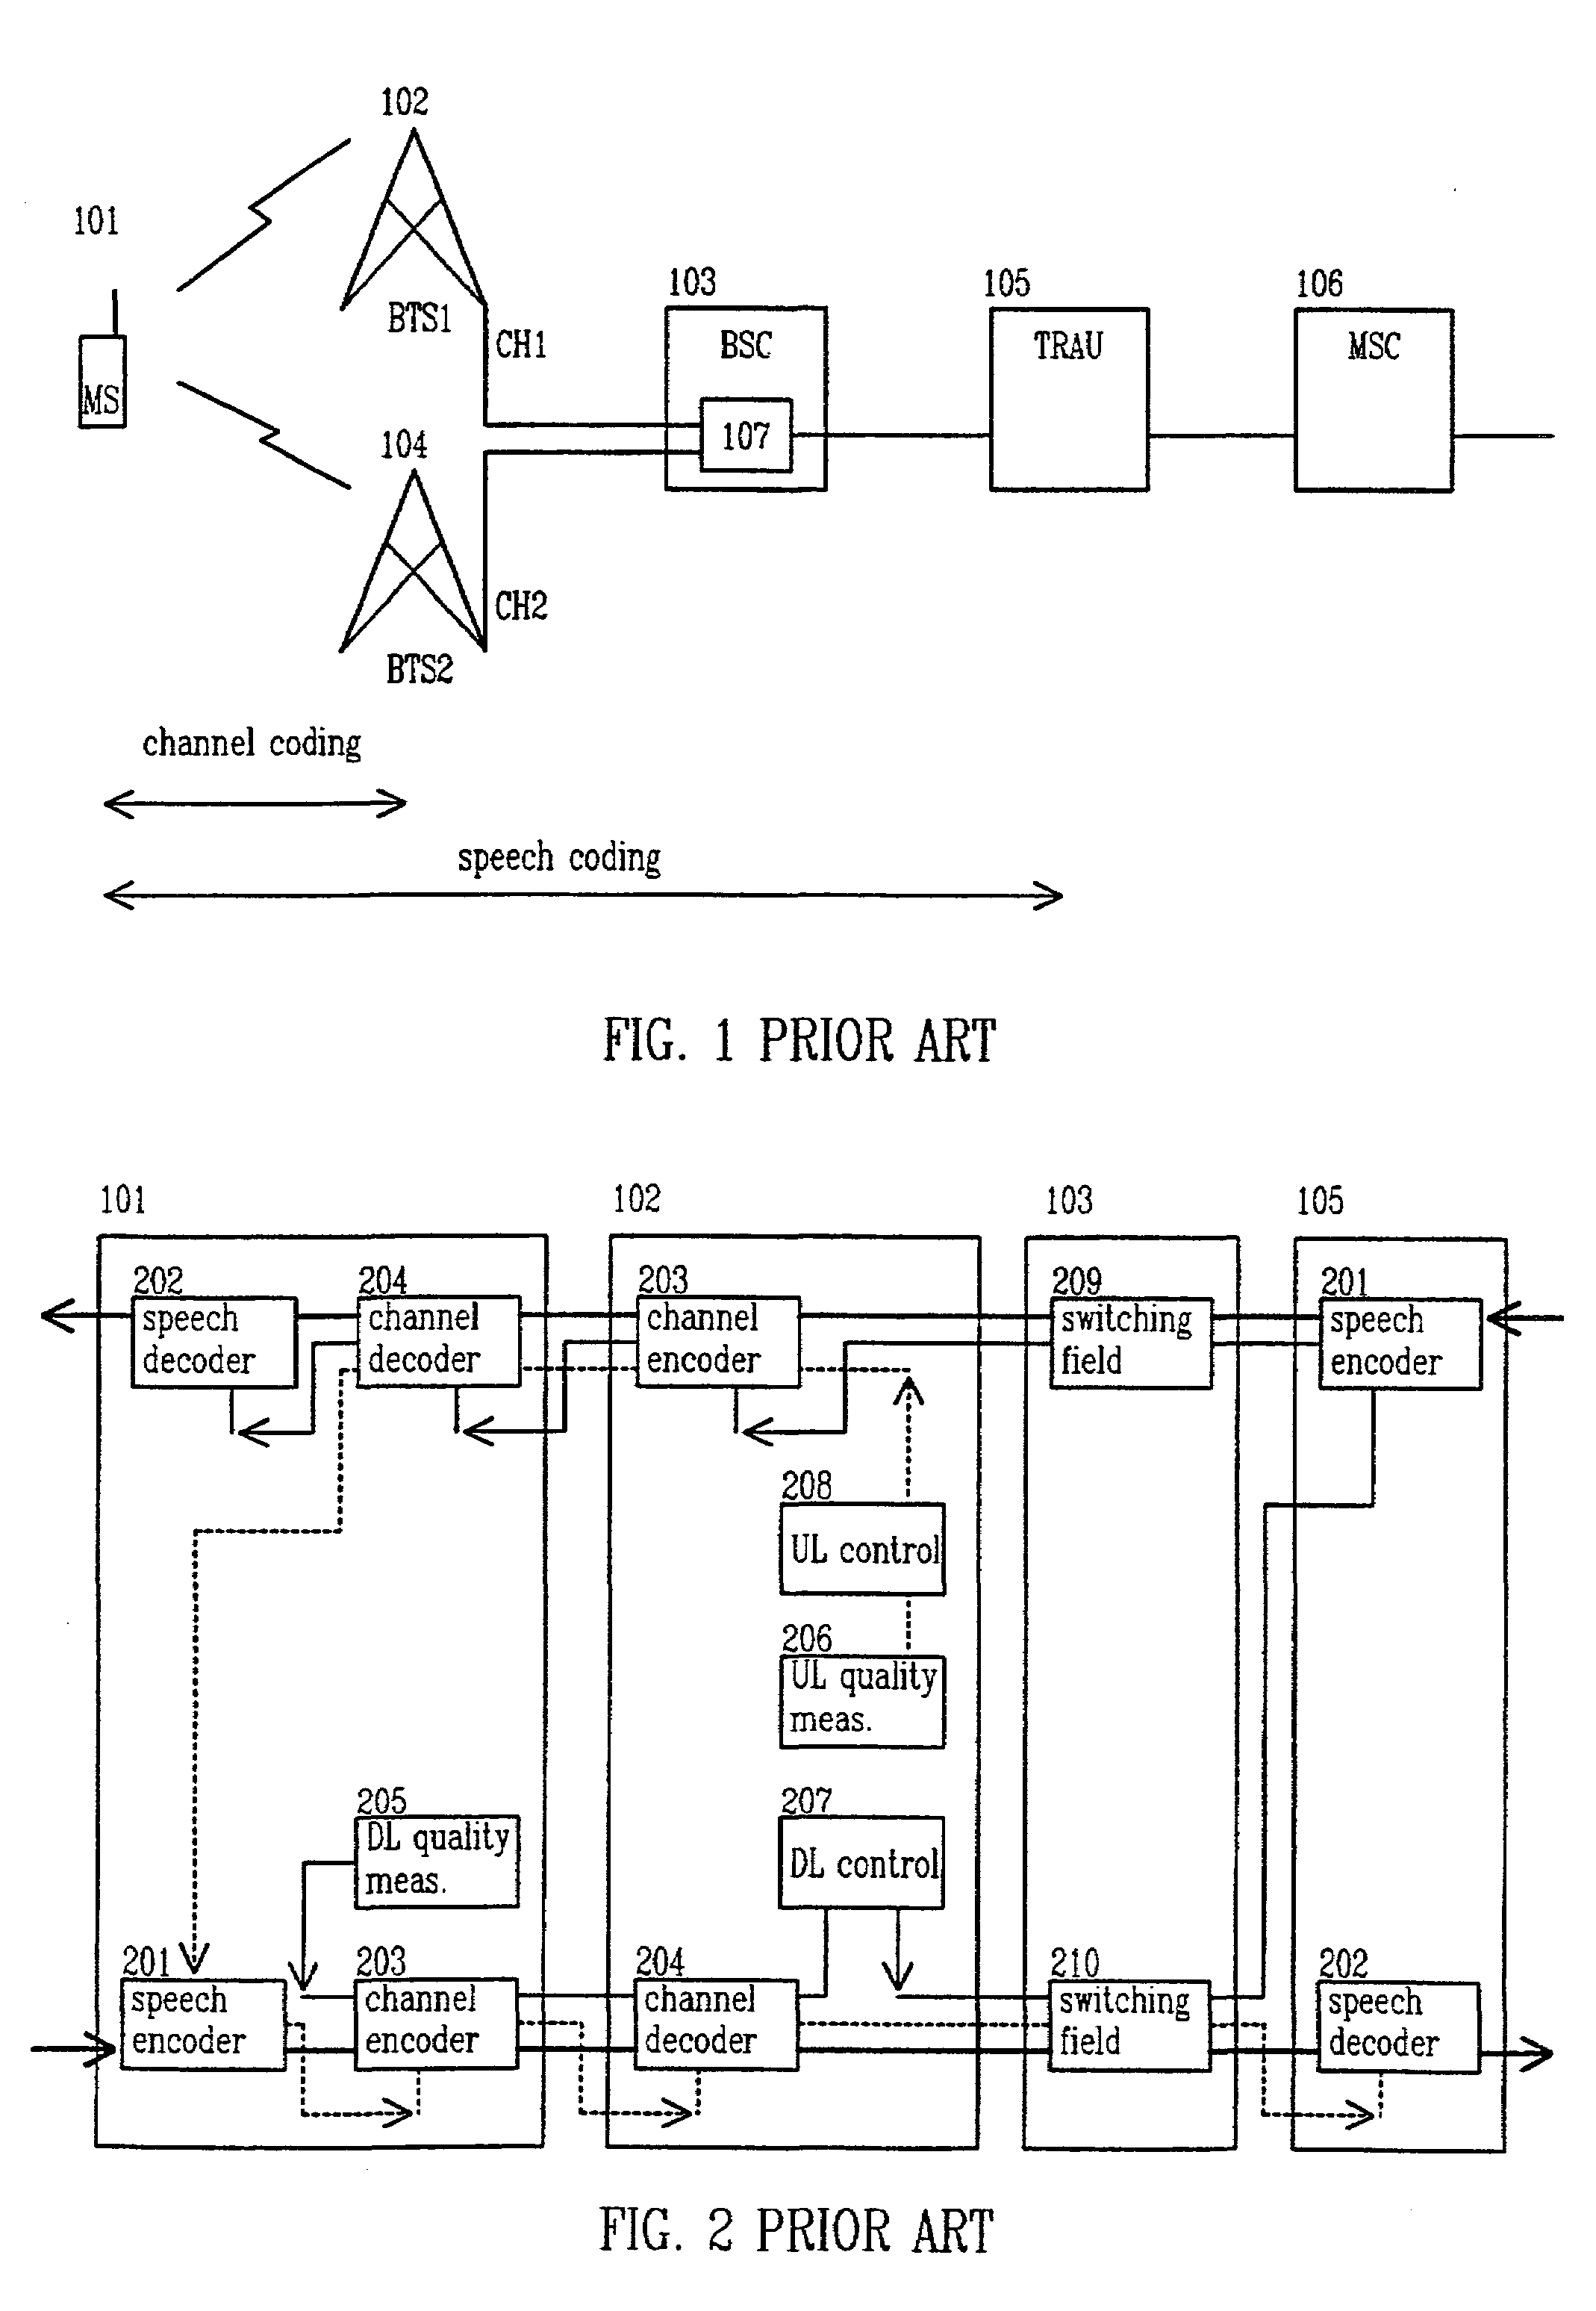 Method for changing the route of a data transfer connection and for increasing the number of connections over a data transfer link